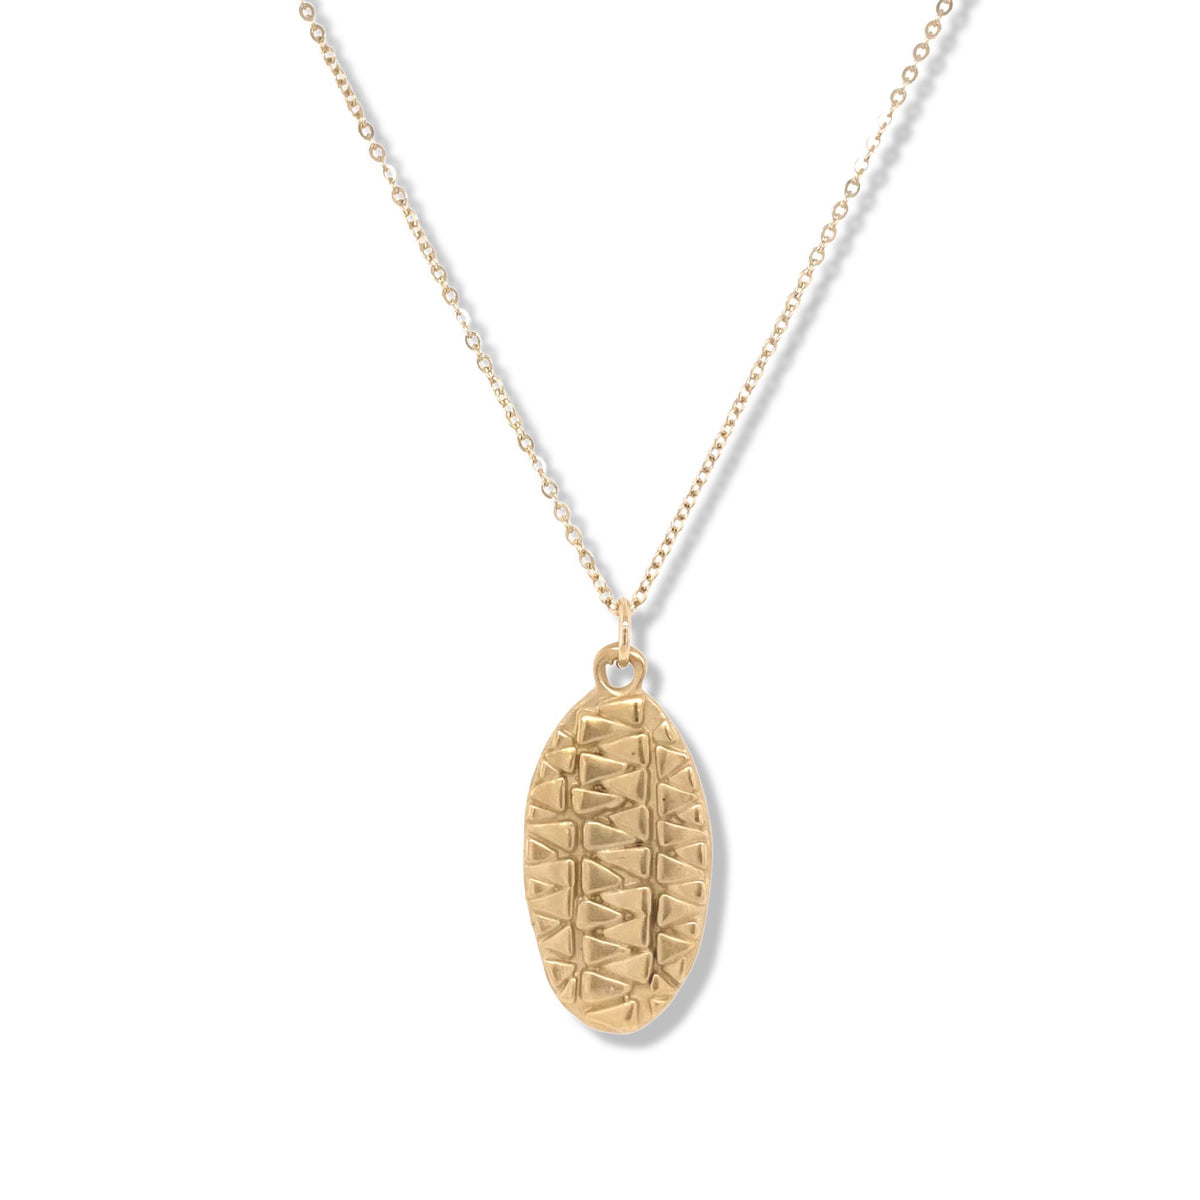 Tribal Oval Gold Necklace | Keely Smith Jewelry | Nantucket